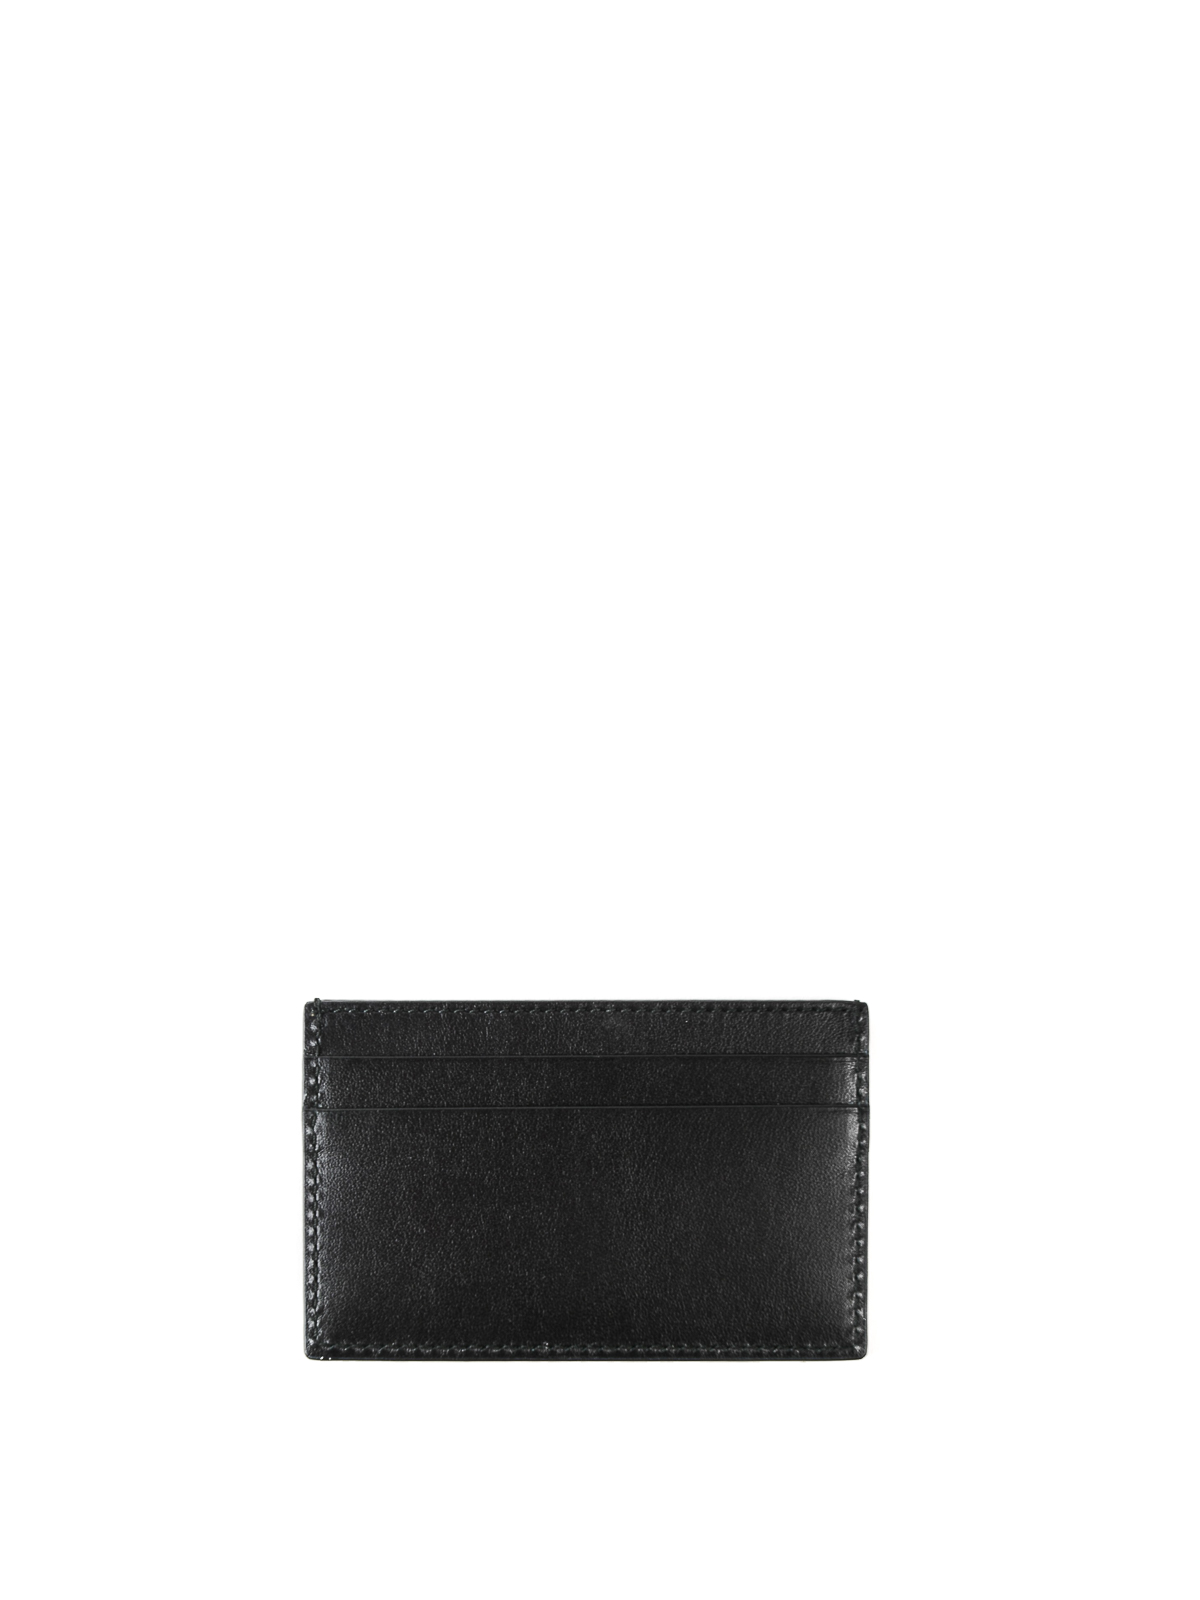 Gucci Vintage Wallets for Women